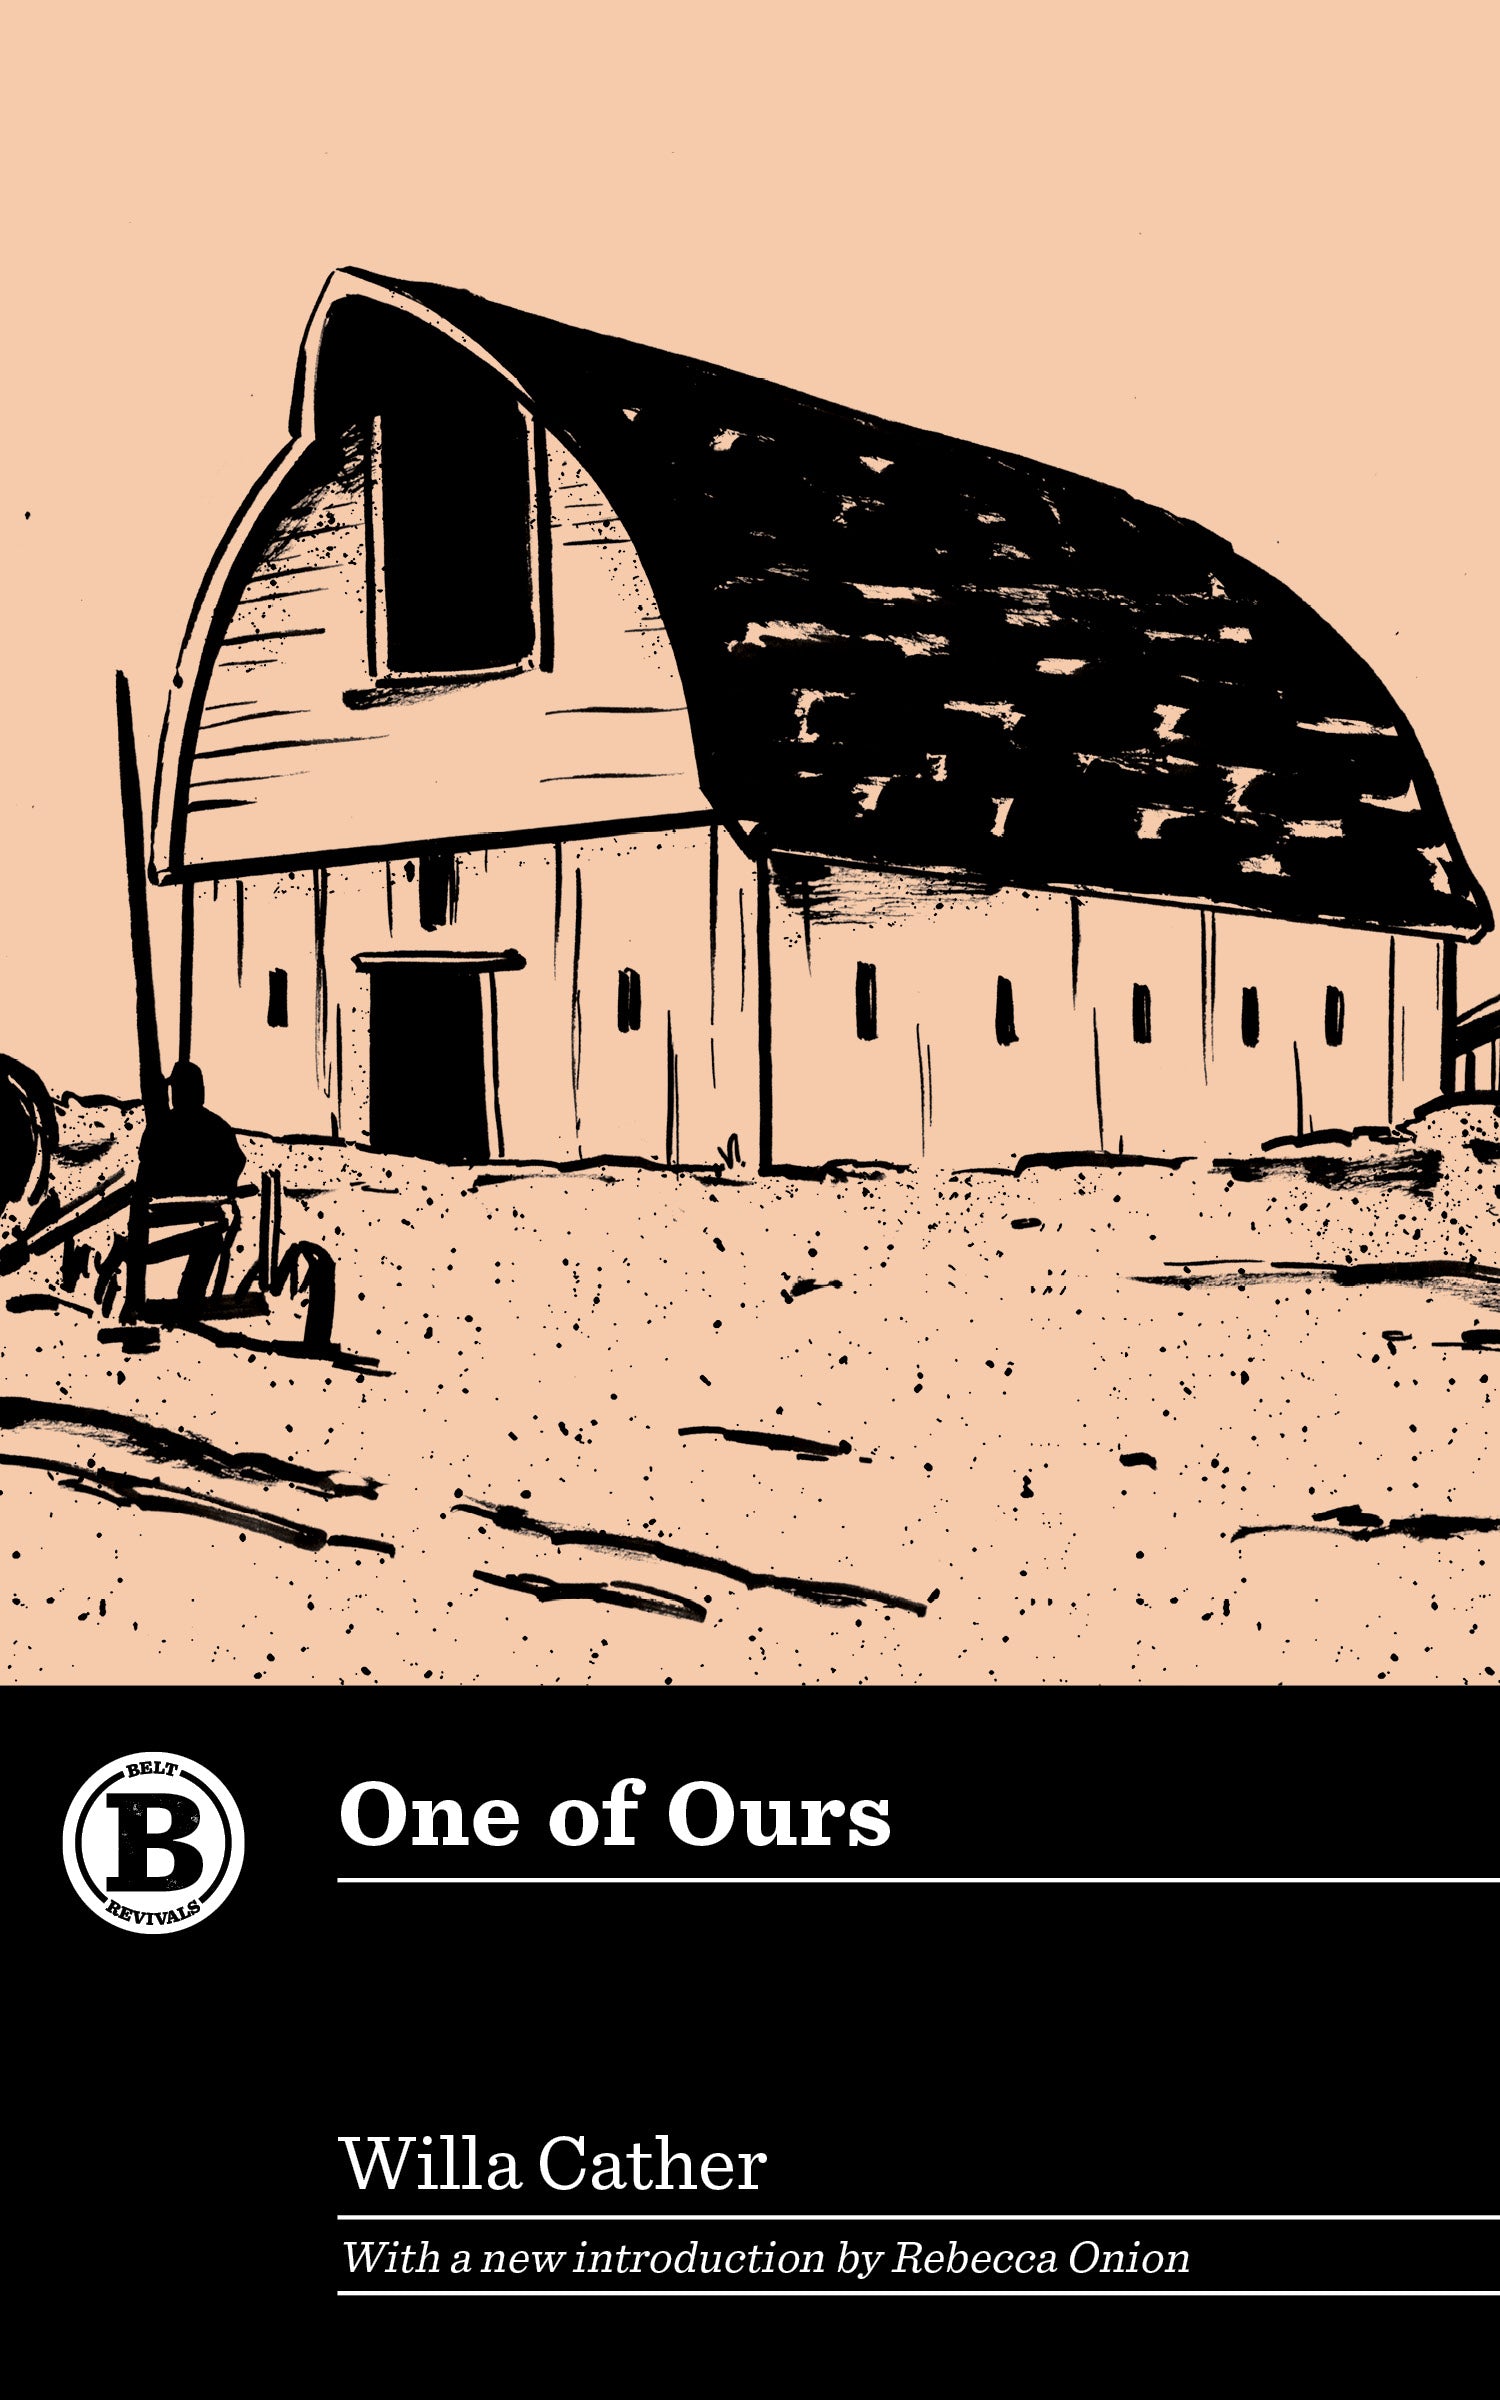 One of Ours by Willa Cather - Belt Publishing